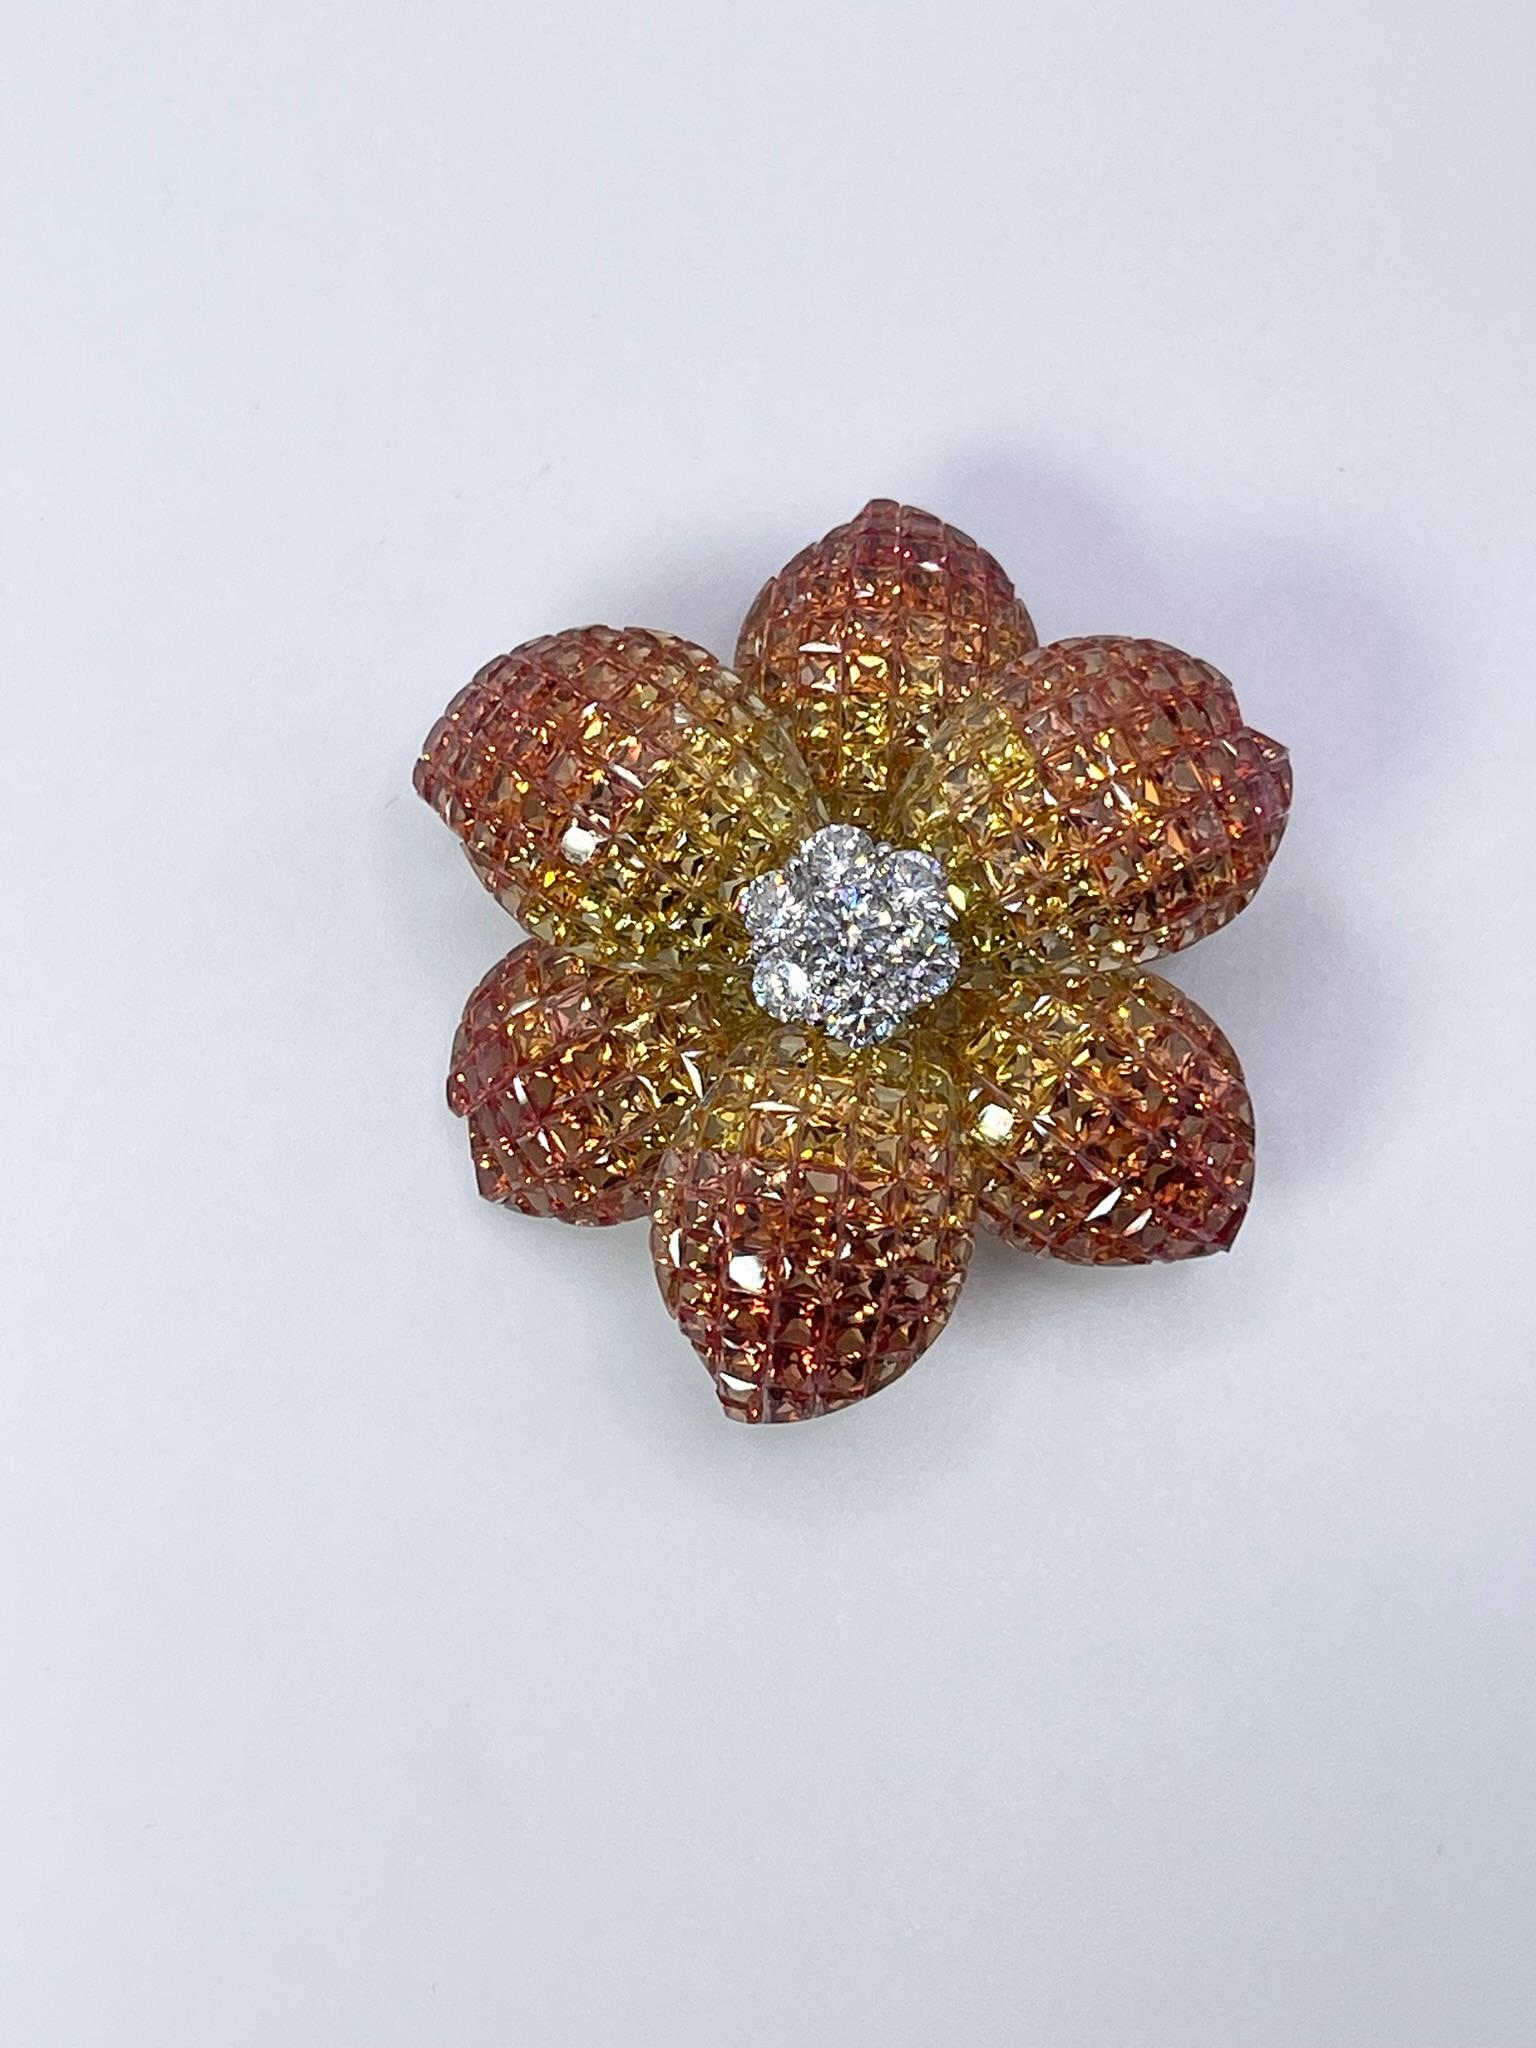 Luxurious flower brooch made with natural sapphires and diamonds in 18KT white gold. The rare setting style is called invisible setting and does not show any metal just stones. 

GRAM WEIGHT: 25.07gr
GOLD: 18KT white gold
SIZE: 1 inch diameter